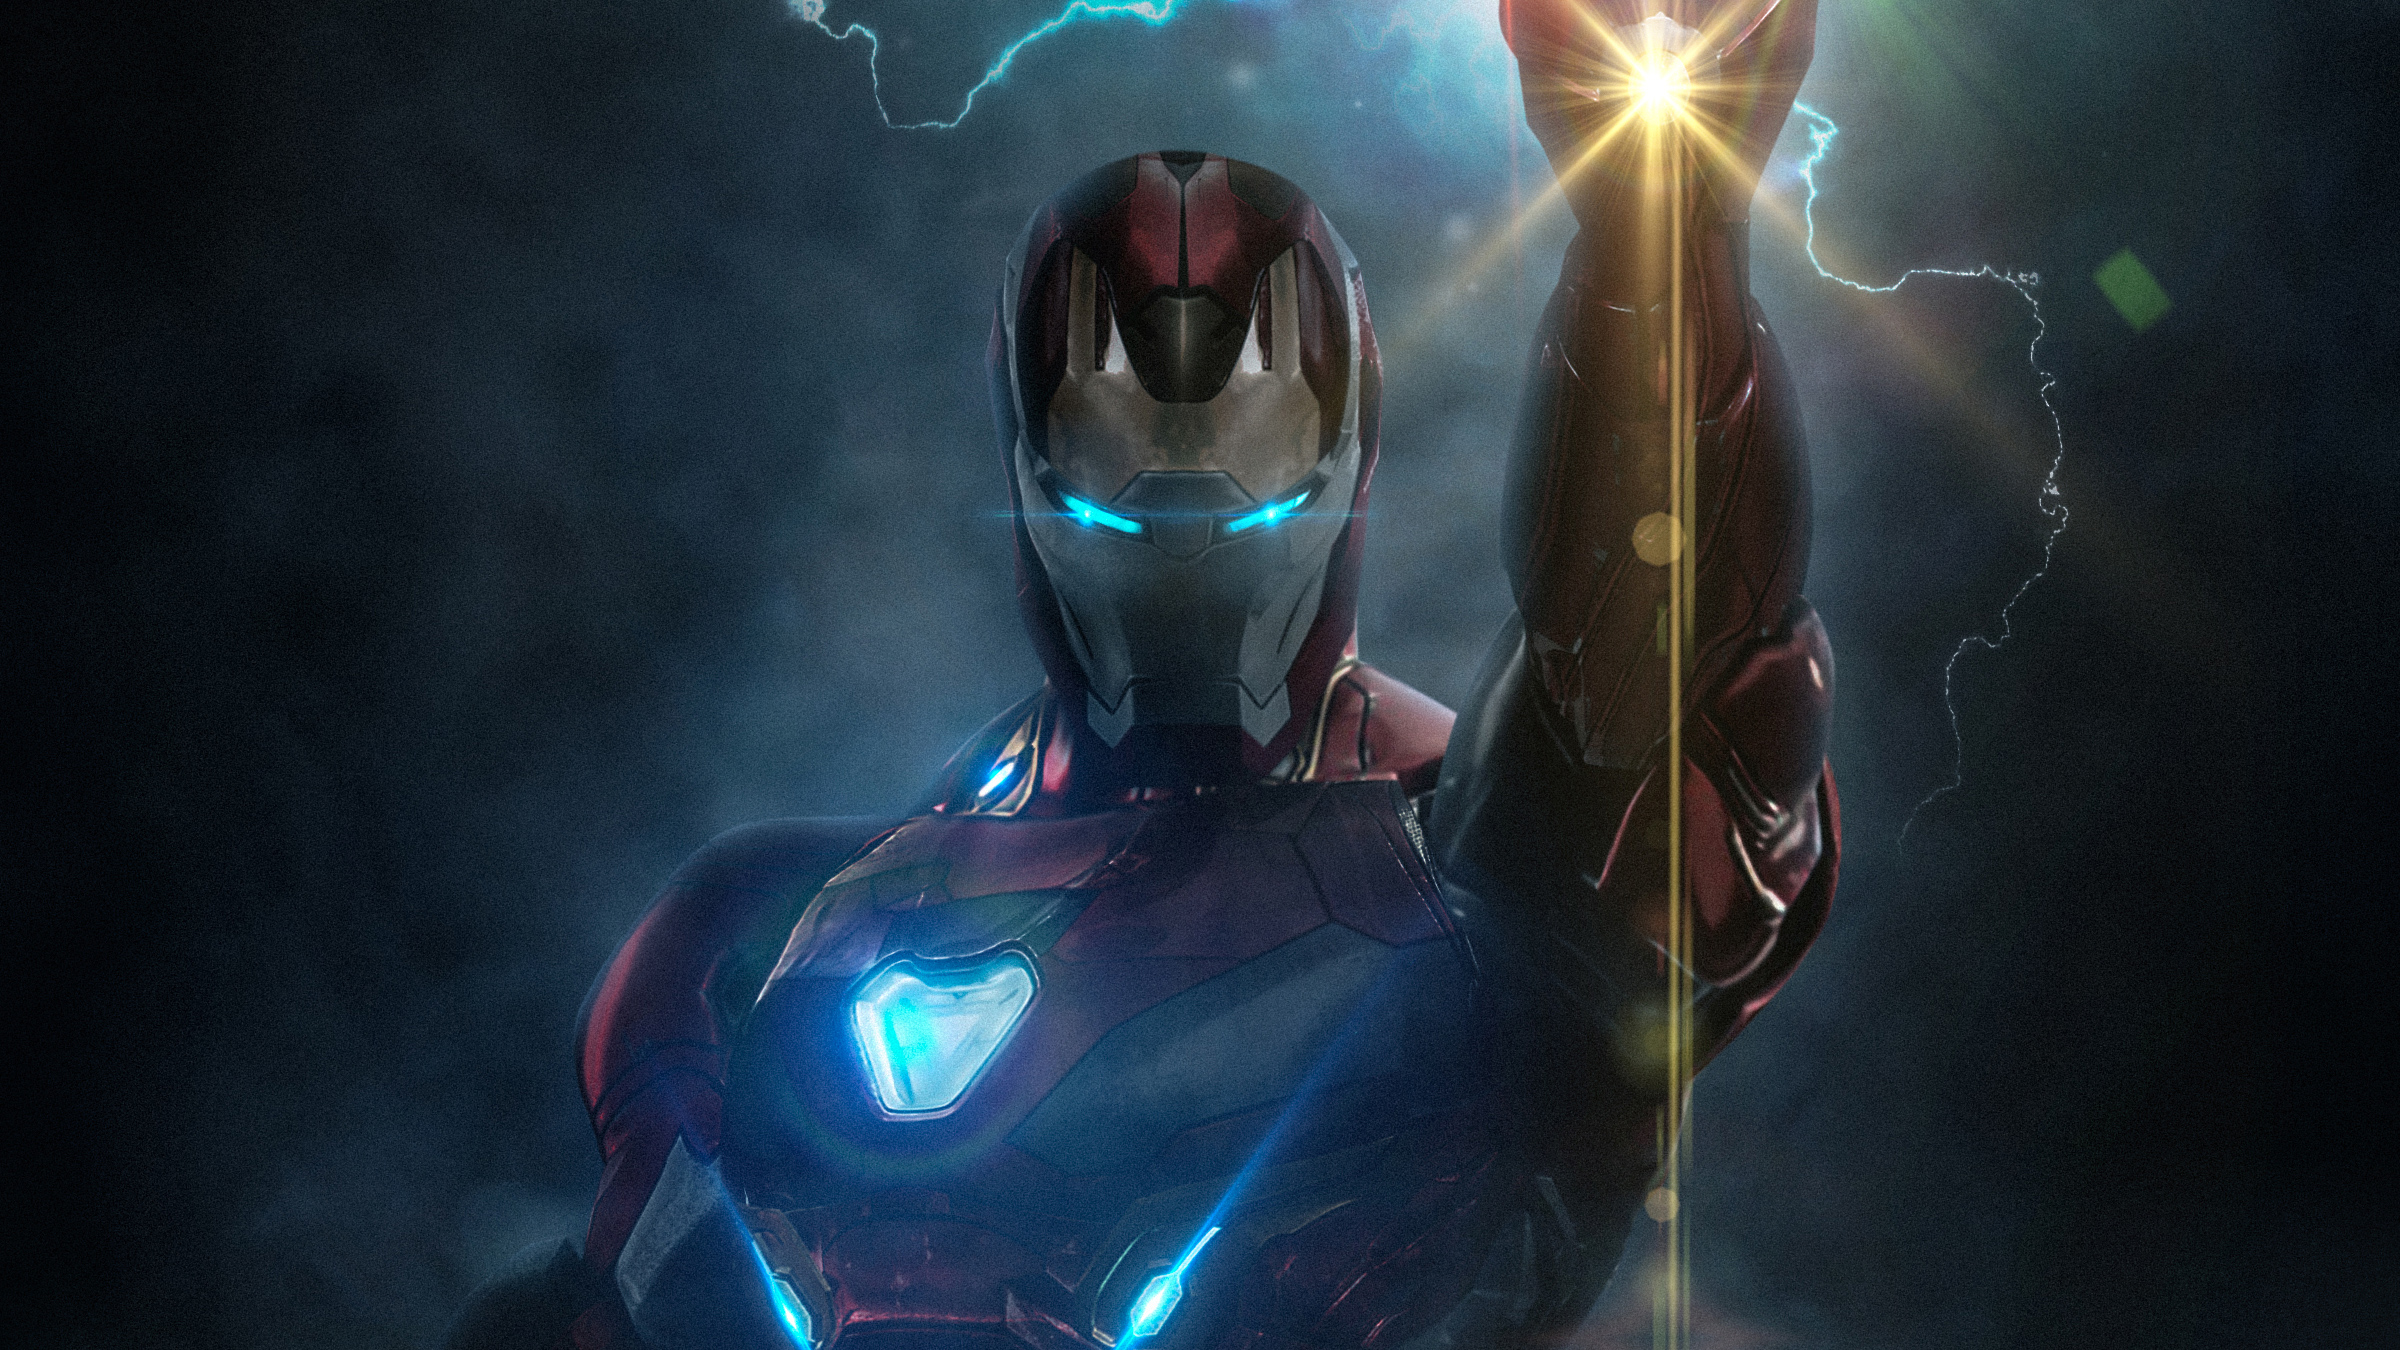 Avengers Endgame HD wallpapers for Android and iPhone